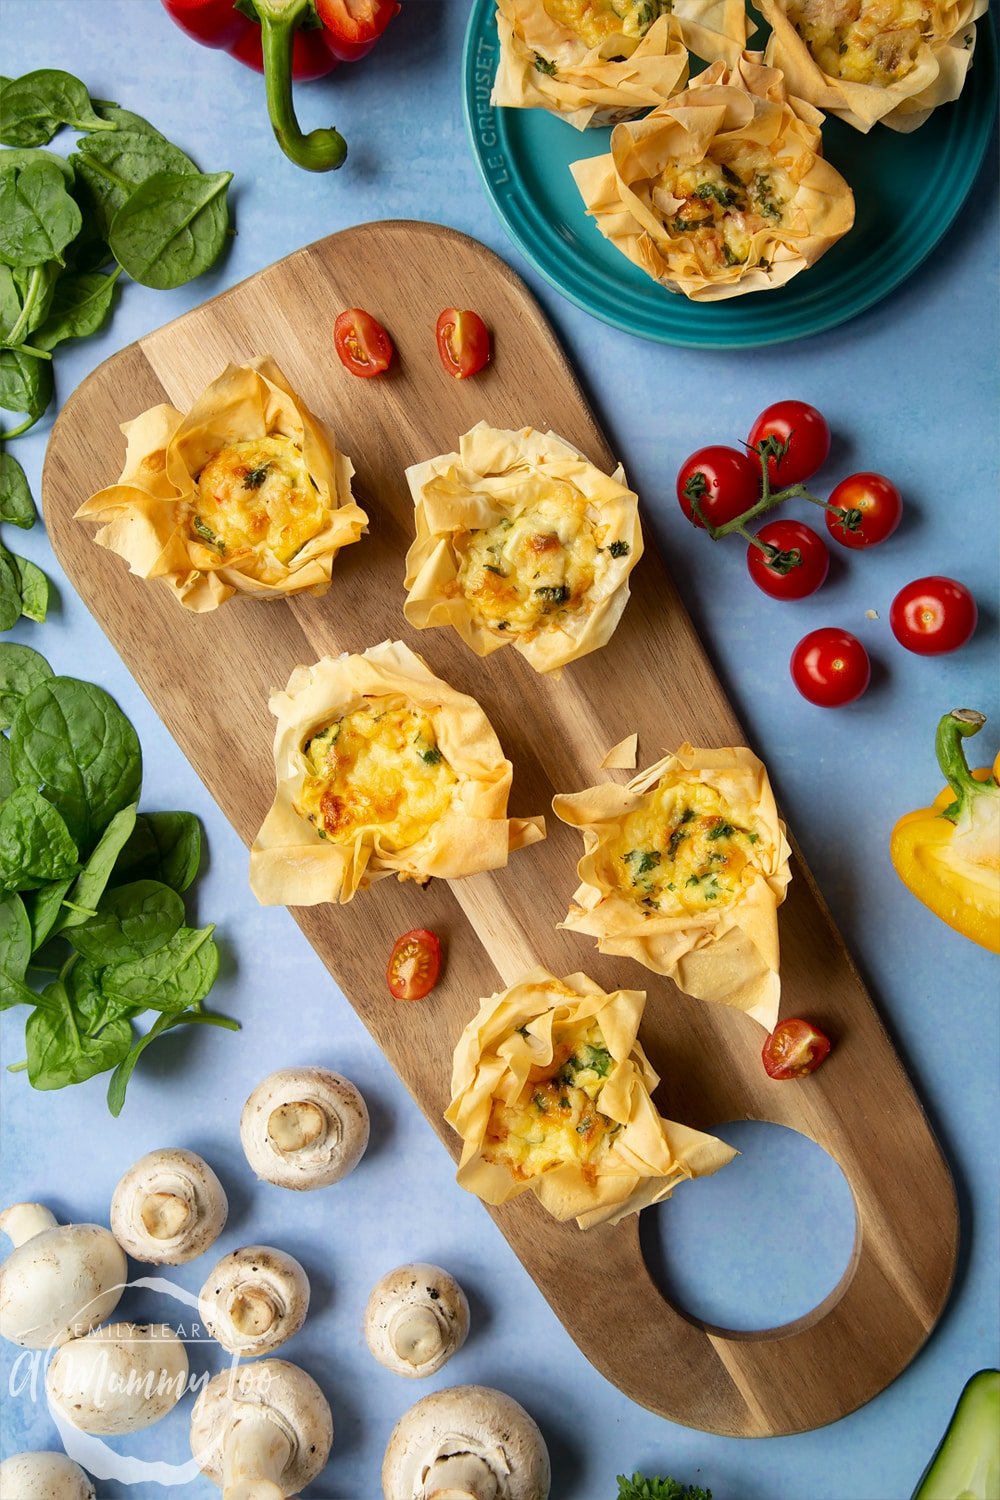 Filo pastry mini quiches recipe. Quiches arranged on a board surrounded by salad.